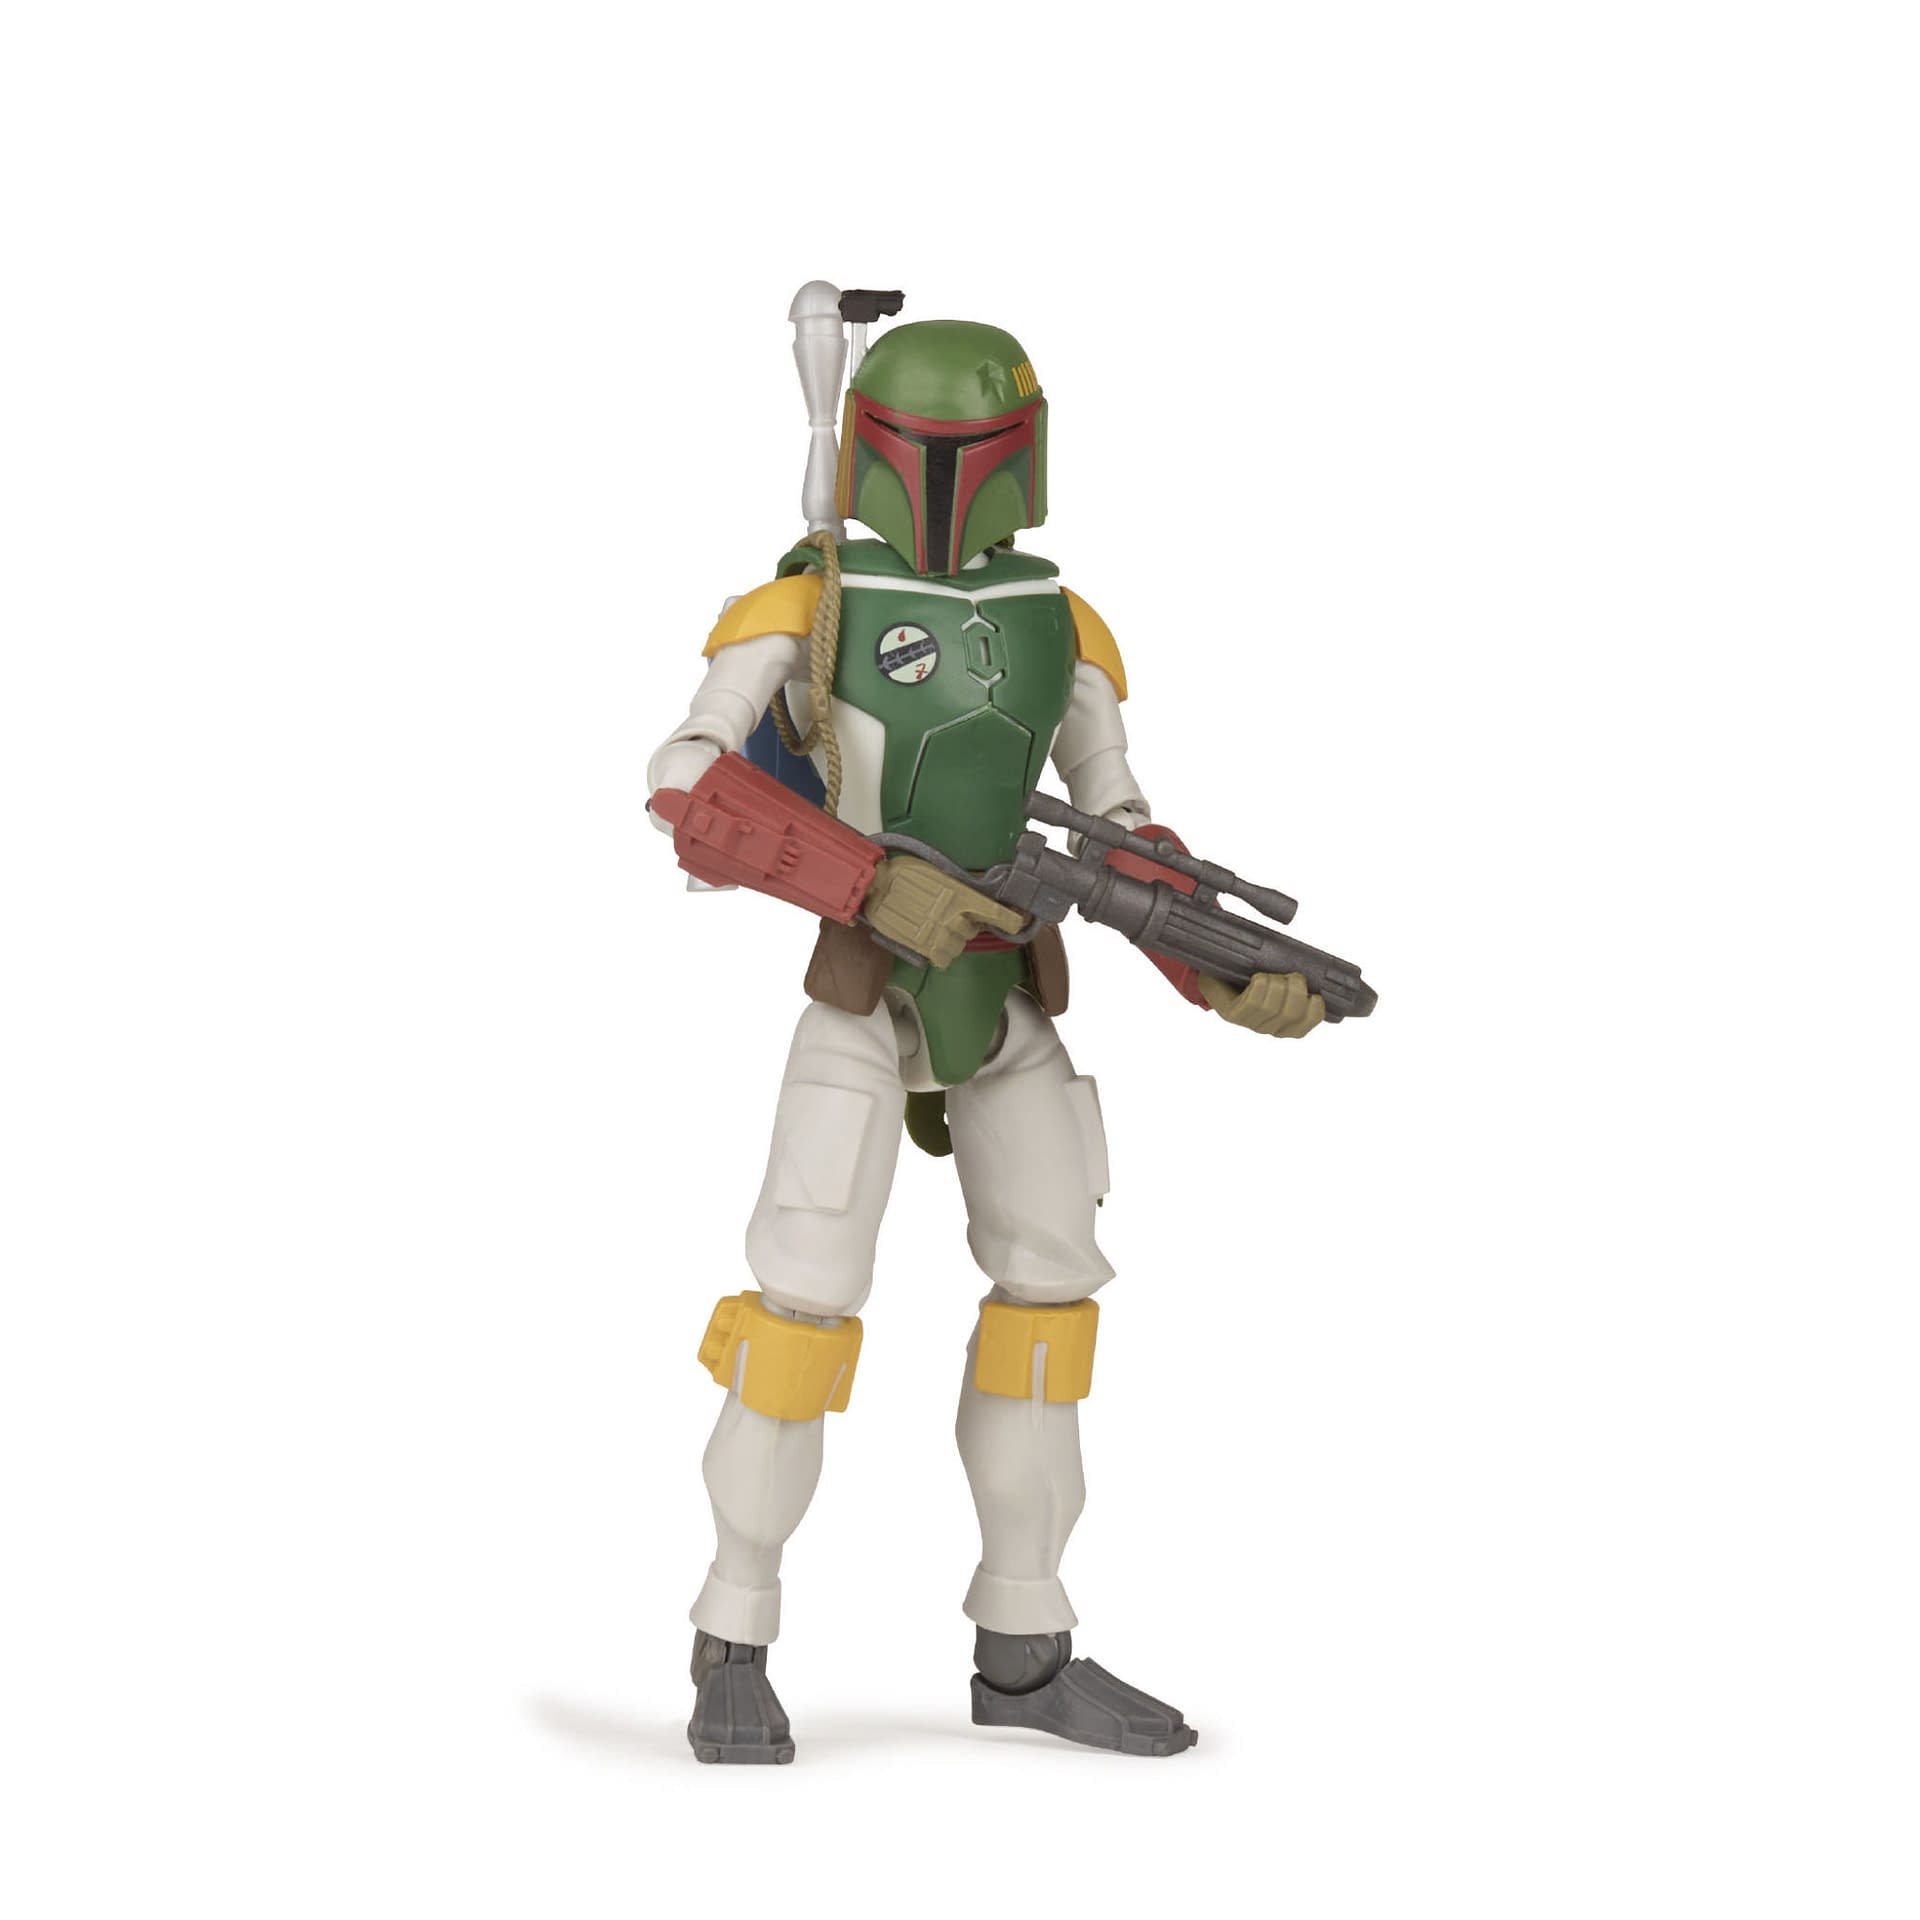 Star Wars Galaxy of Adventures 5" Animated Style Action Figure Boba Fett 